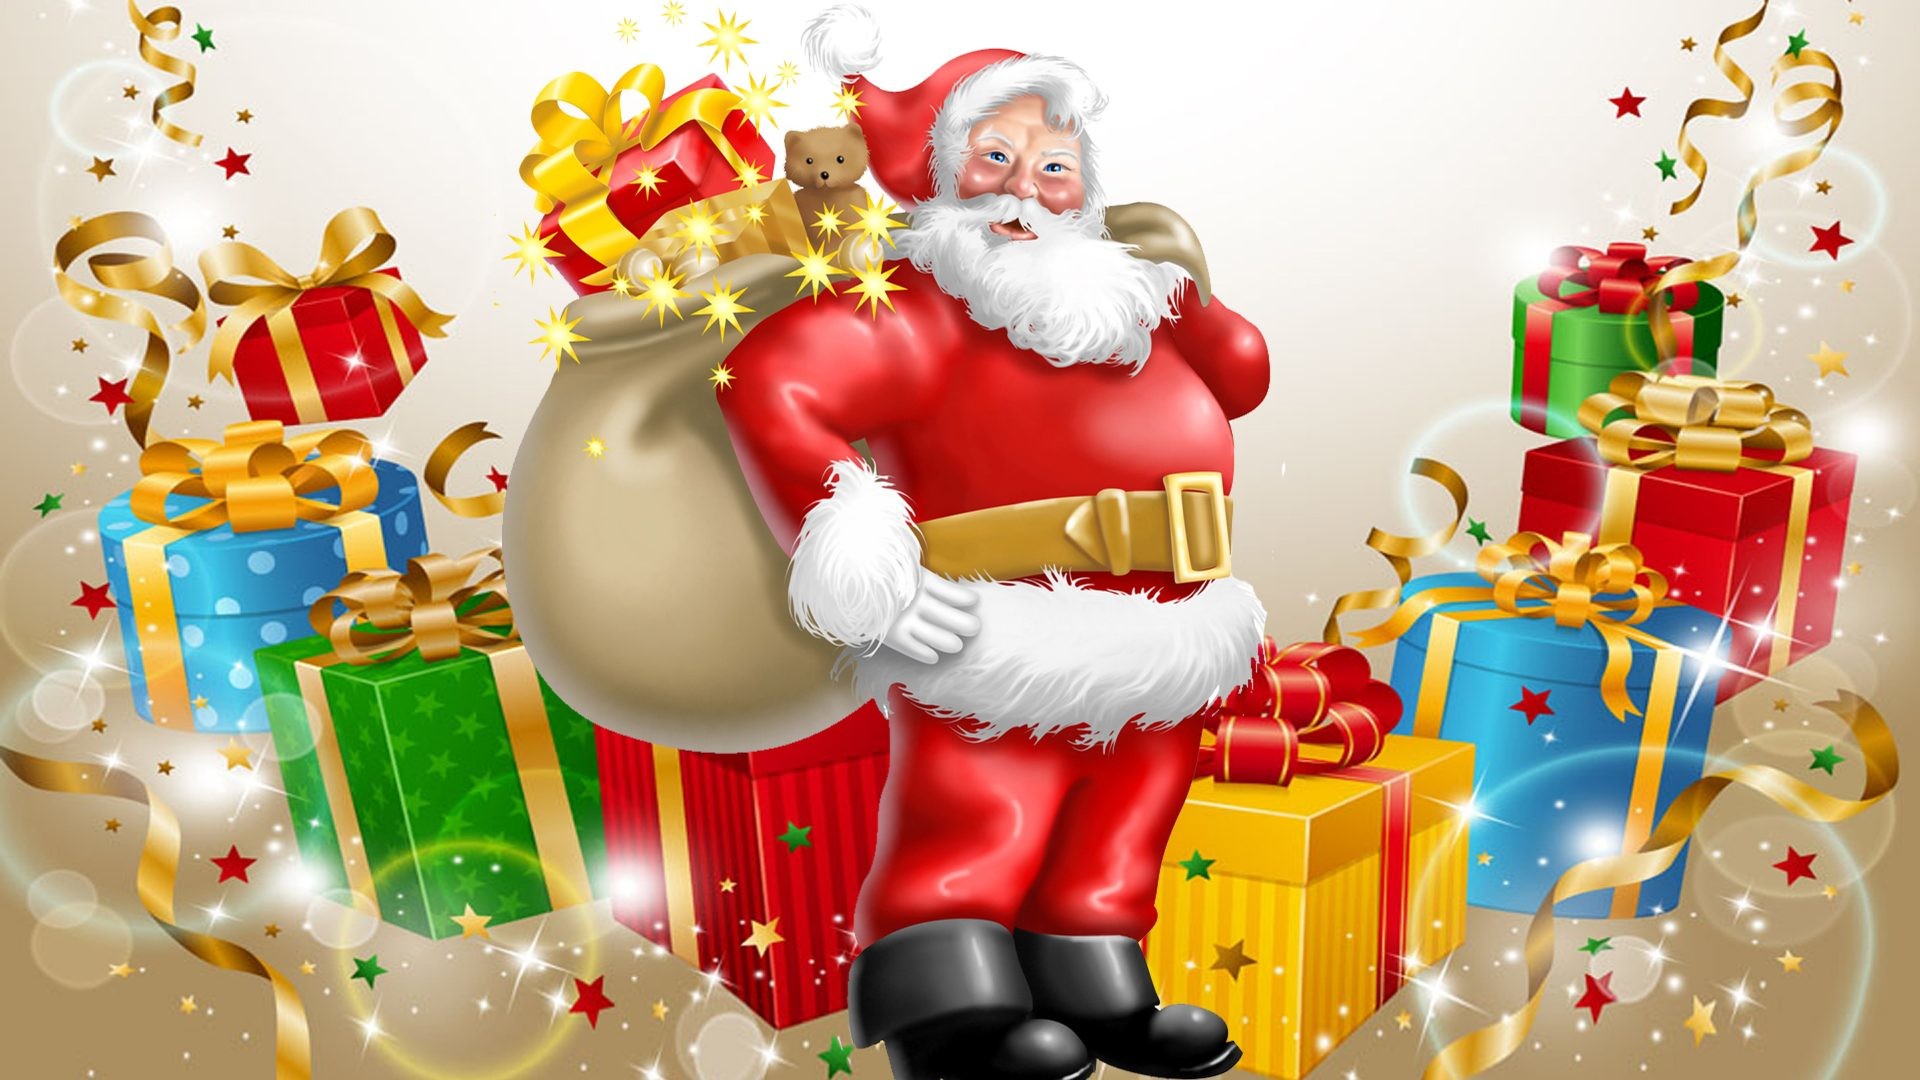 Merry Christmas Santa Claus Images 2021